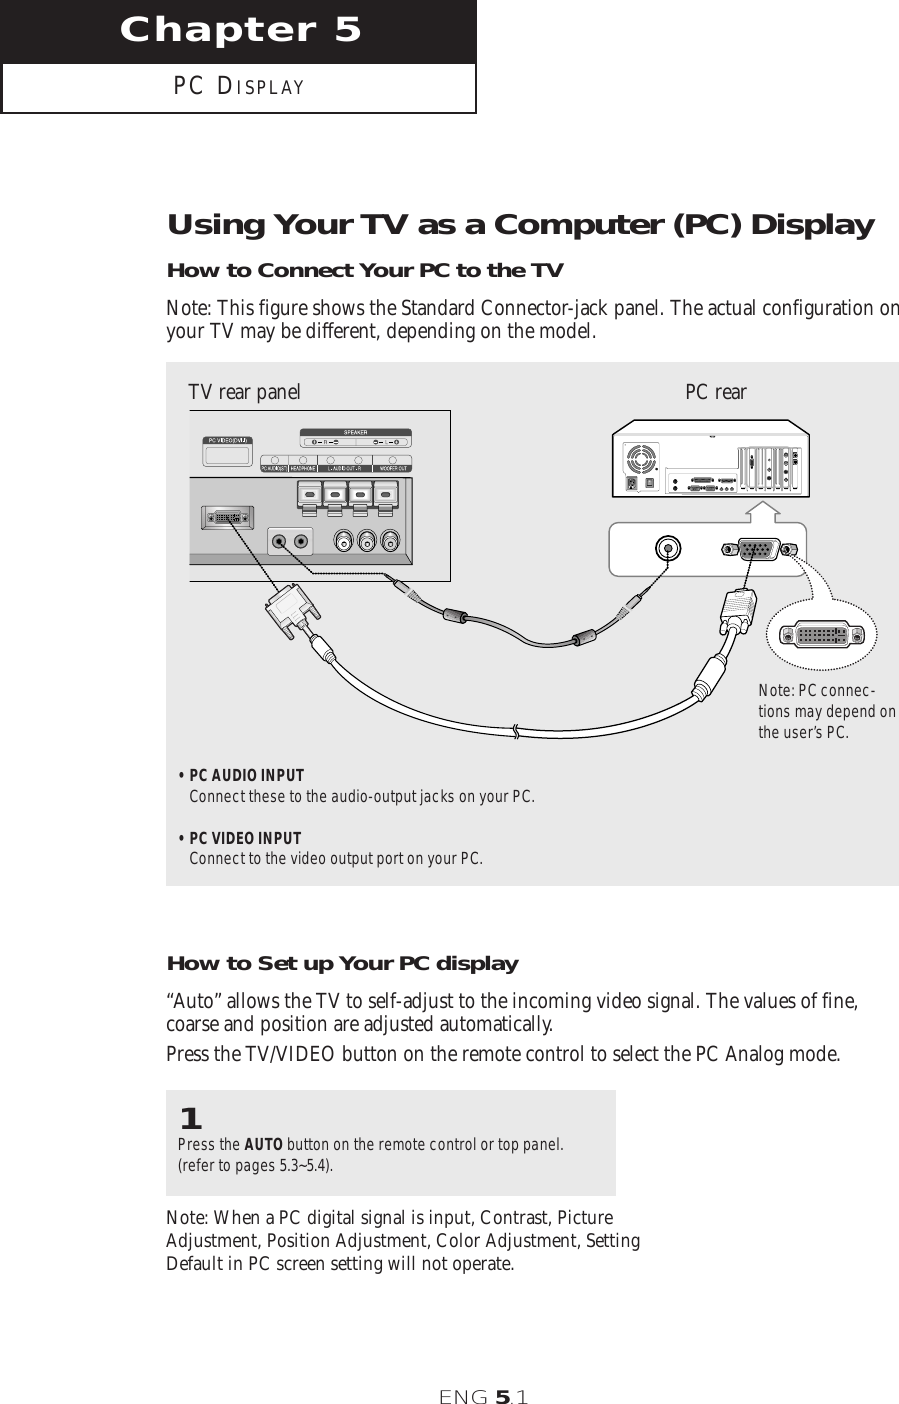 ENG 5.1Chapter 5PC DISPLAYUsing Your TV as a Computer (PC) DisplayHow to Connect Your PC to the TVNote: This figure shows the Standard Connector-jack panel. The actual configuration onyour TV may be different, depending on the model.• PC AUDIO INPUTConnect these to the audio-output jacks on your PC.• PC VIDEO INPUTConnect to the video output port on your PC.TV rear panel PC rearHow to Set up Your PC display“Auto” allows the TV to self-adjust to the incoming video signal. The values of fine,coarse and position are adjusted automatically.Press the TV/VIDEO button on the remote control to select the PC Analog mode.1Press the AUTO button on the remote control or top panel.(refer to pages 5.3~5.4).Note: PC connec-tions may depend onthe user’s PC.Note: When a PC digital signal is input, Contrast, PictureAdjustment, Position Adjustment, Color Adjustment, SettingDefault in PC screen setting will not operate.